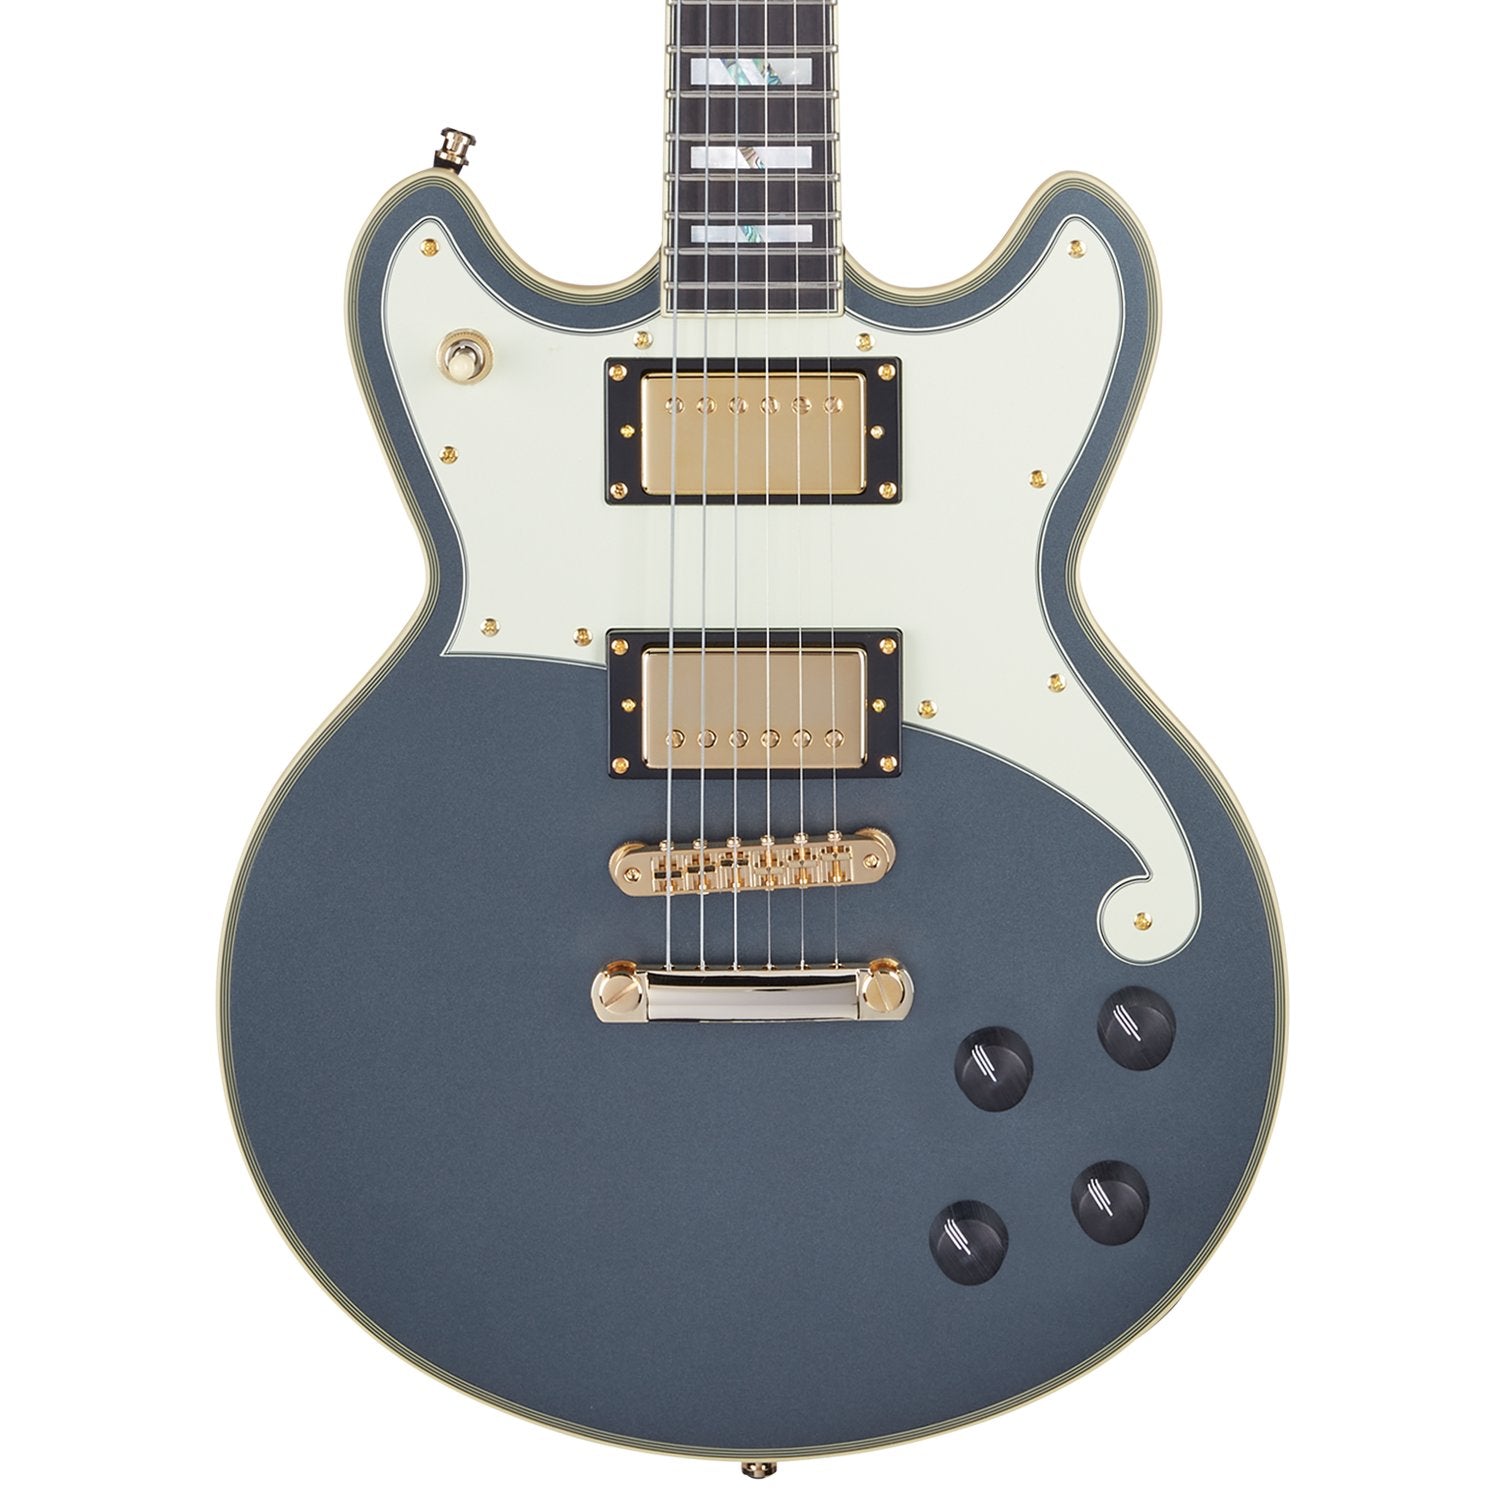 D'Angelico Deluxe Brighton Limited Edition - Matte Charcoal